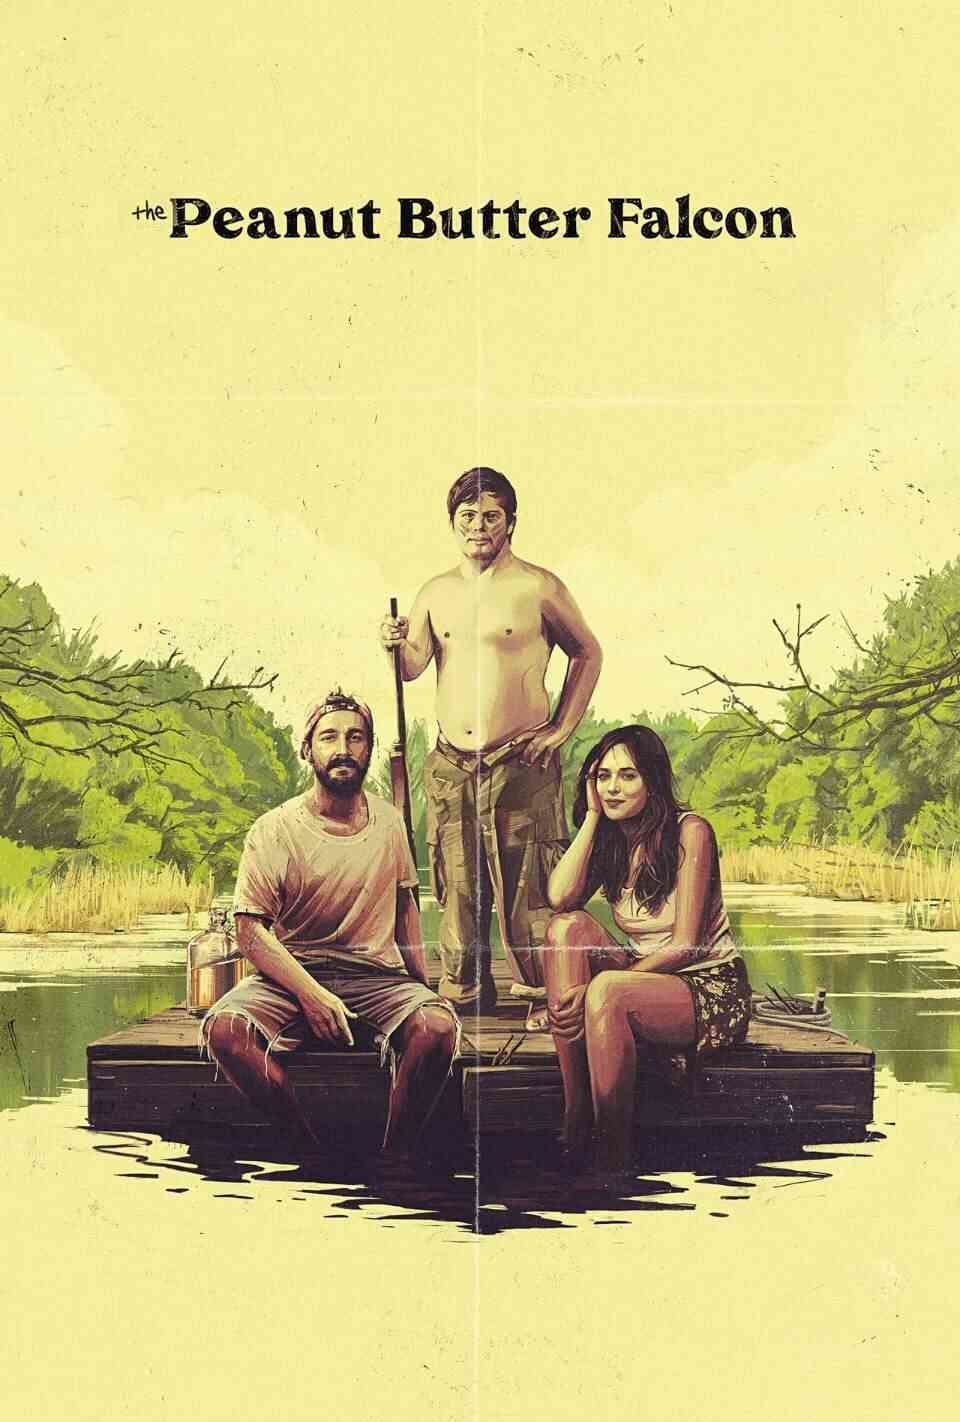 Read The Peanut Butter Falcon screenplay (poster)